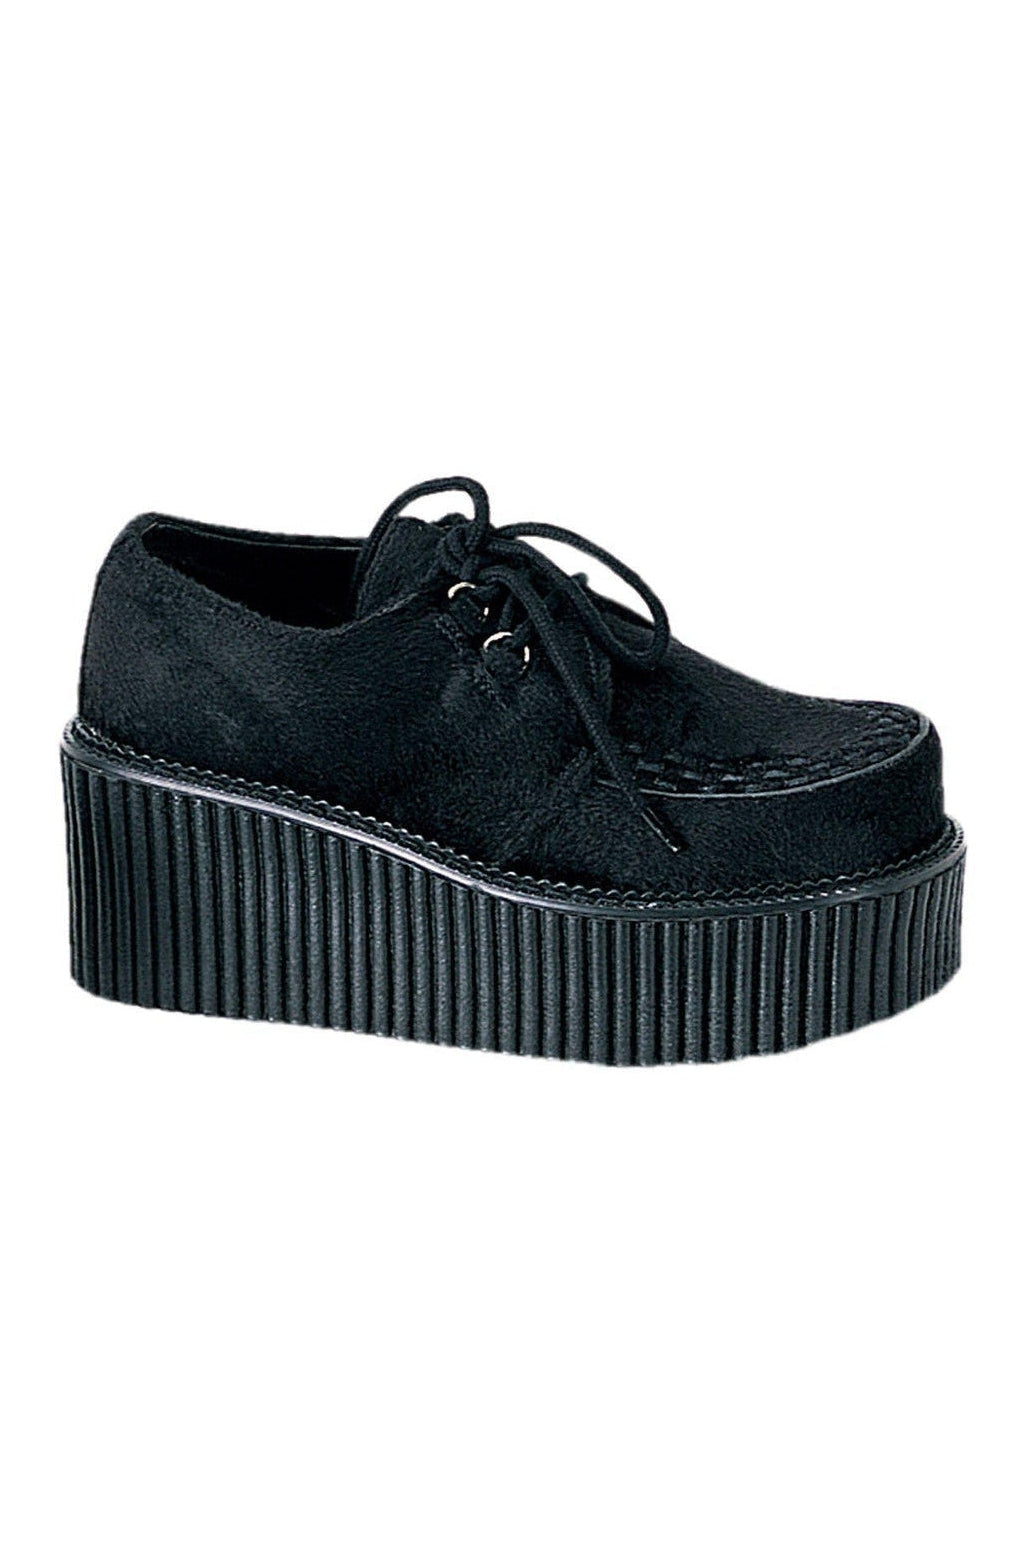 CREEPER-202 Creepers | Black Faux Leather-Creepers-Demonia-SEXYSHOES.COM